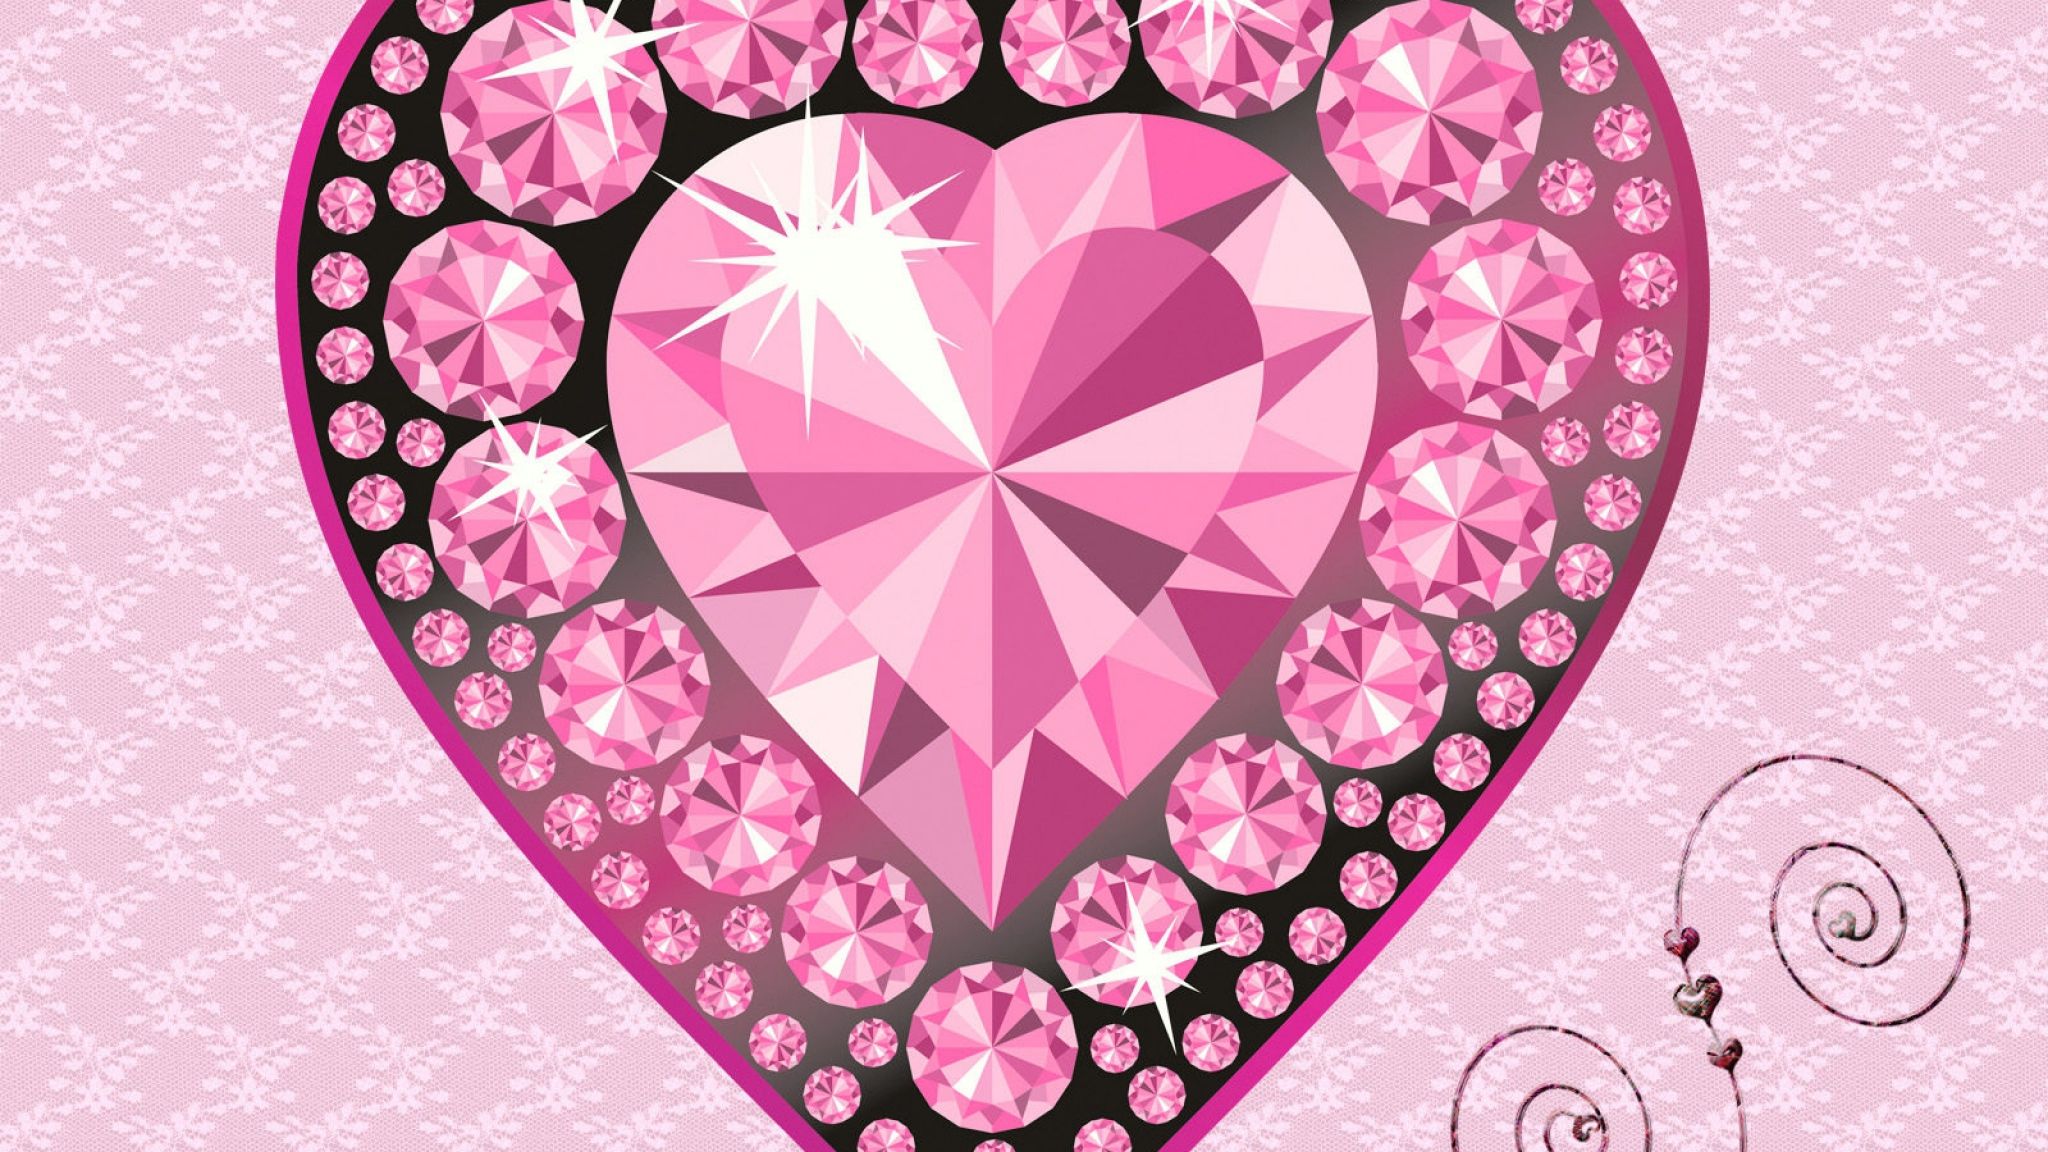 Widescreen Diamond Wallpaper Cool Image Pink Picture